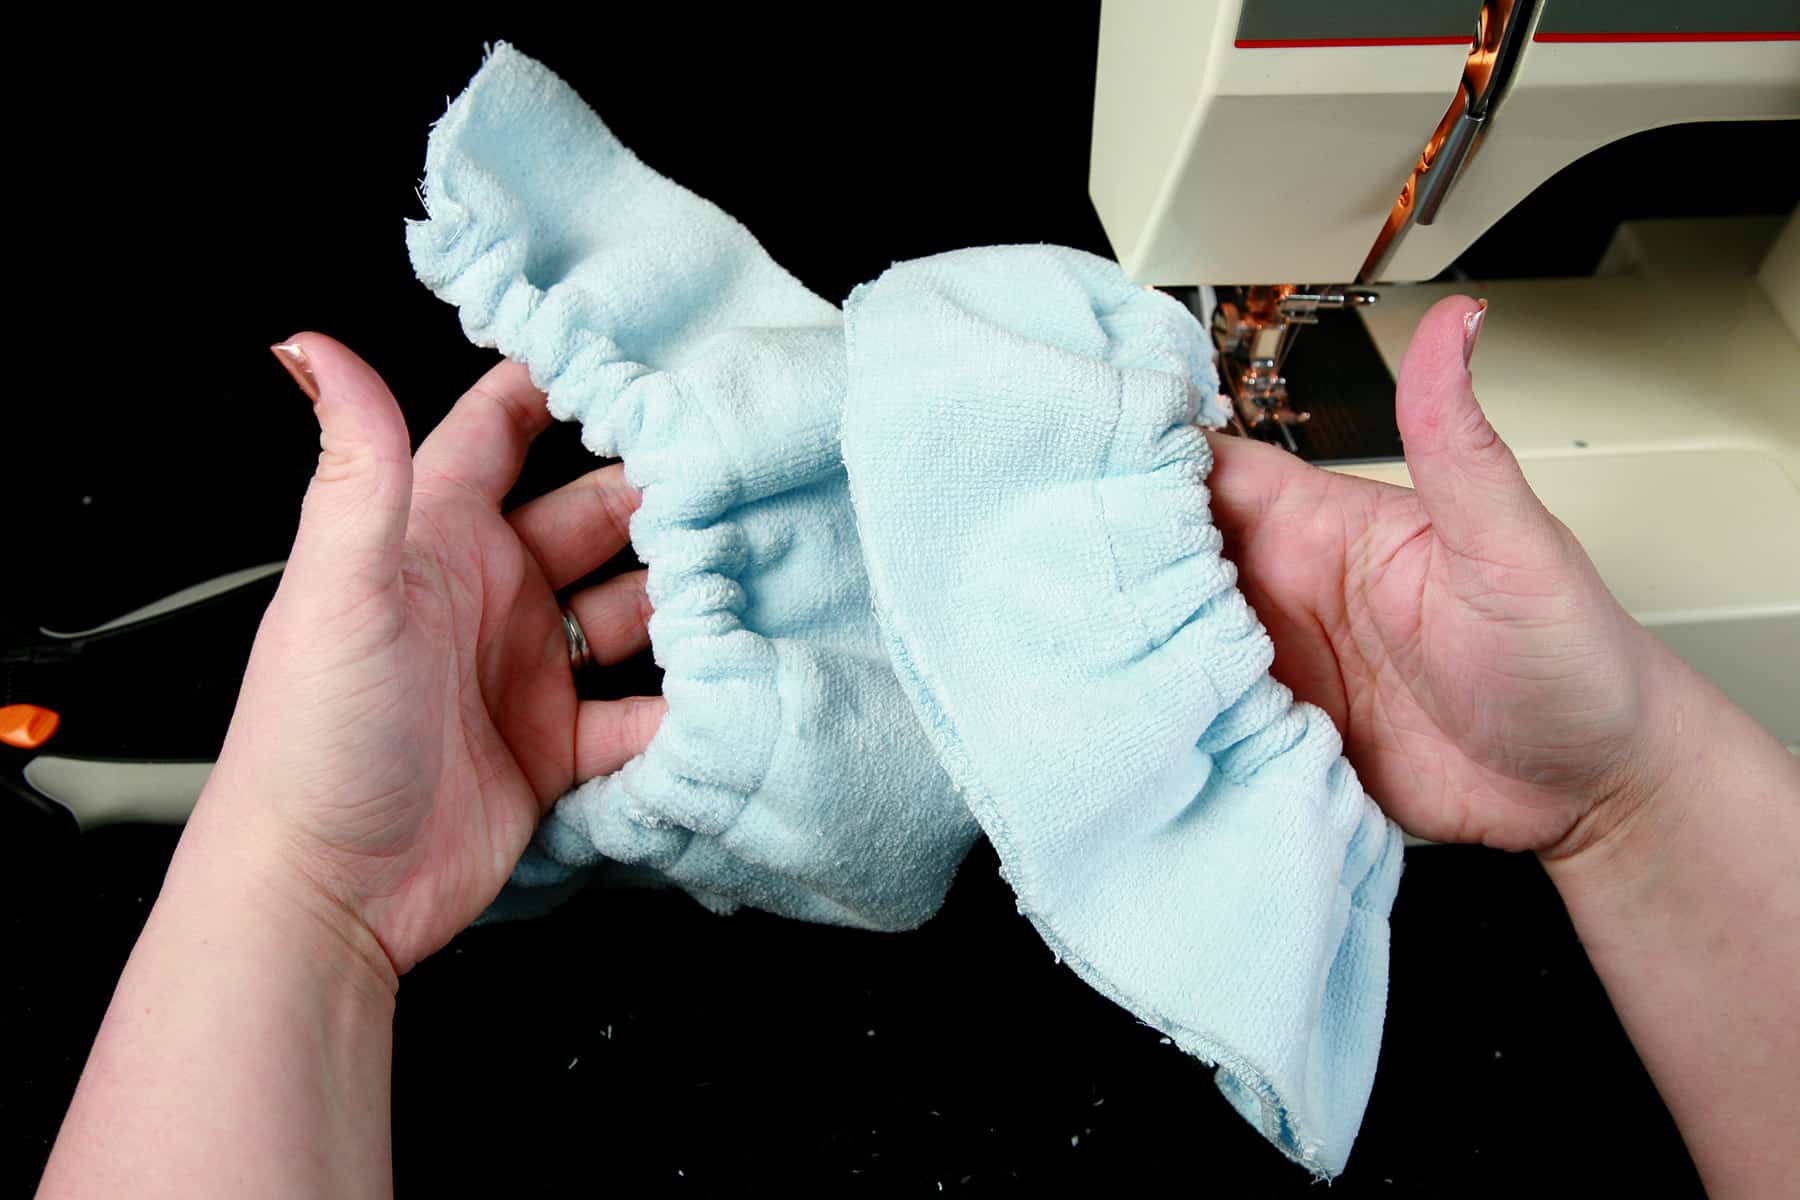 A pair of hands hold up two gathered sections of light blue terrycloth in front of a sewing machine.